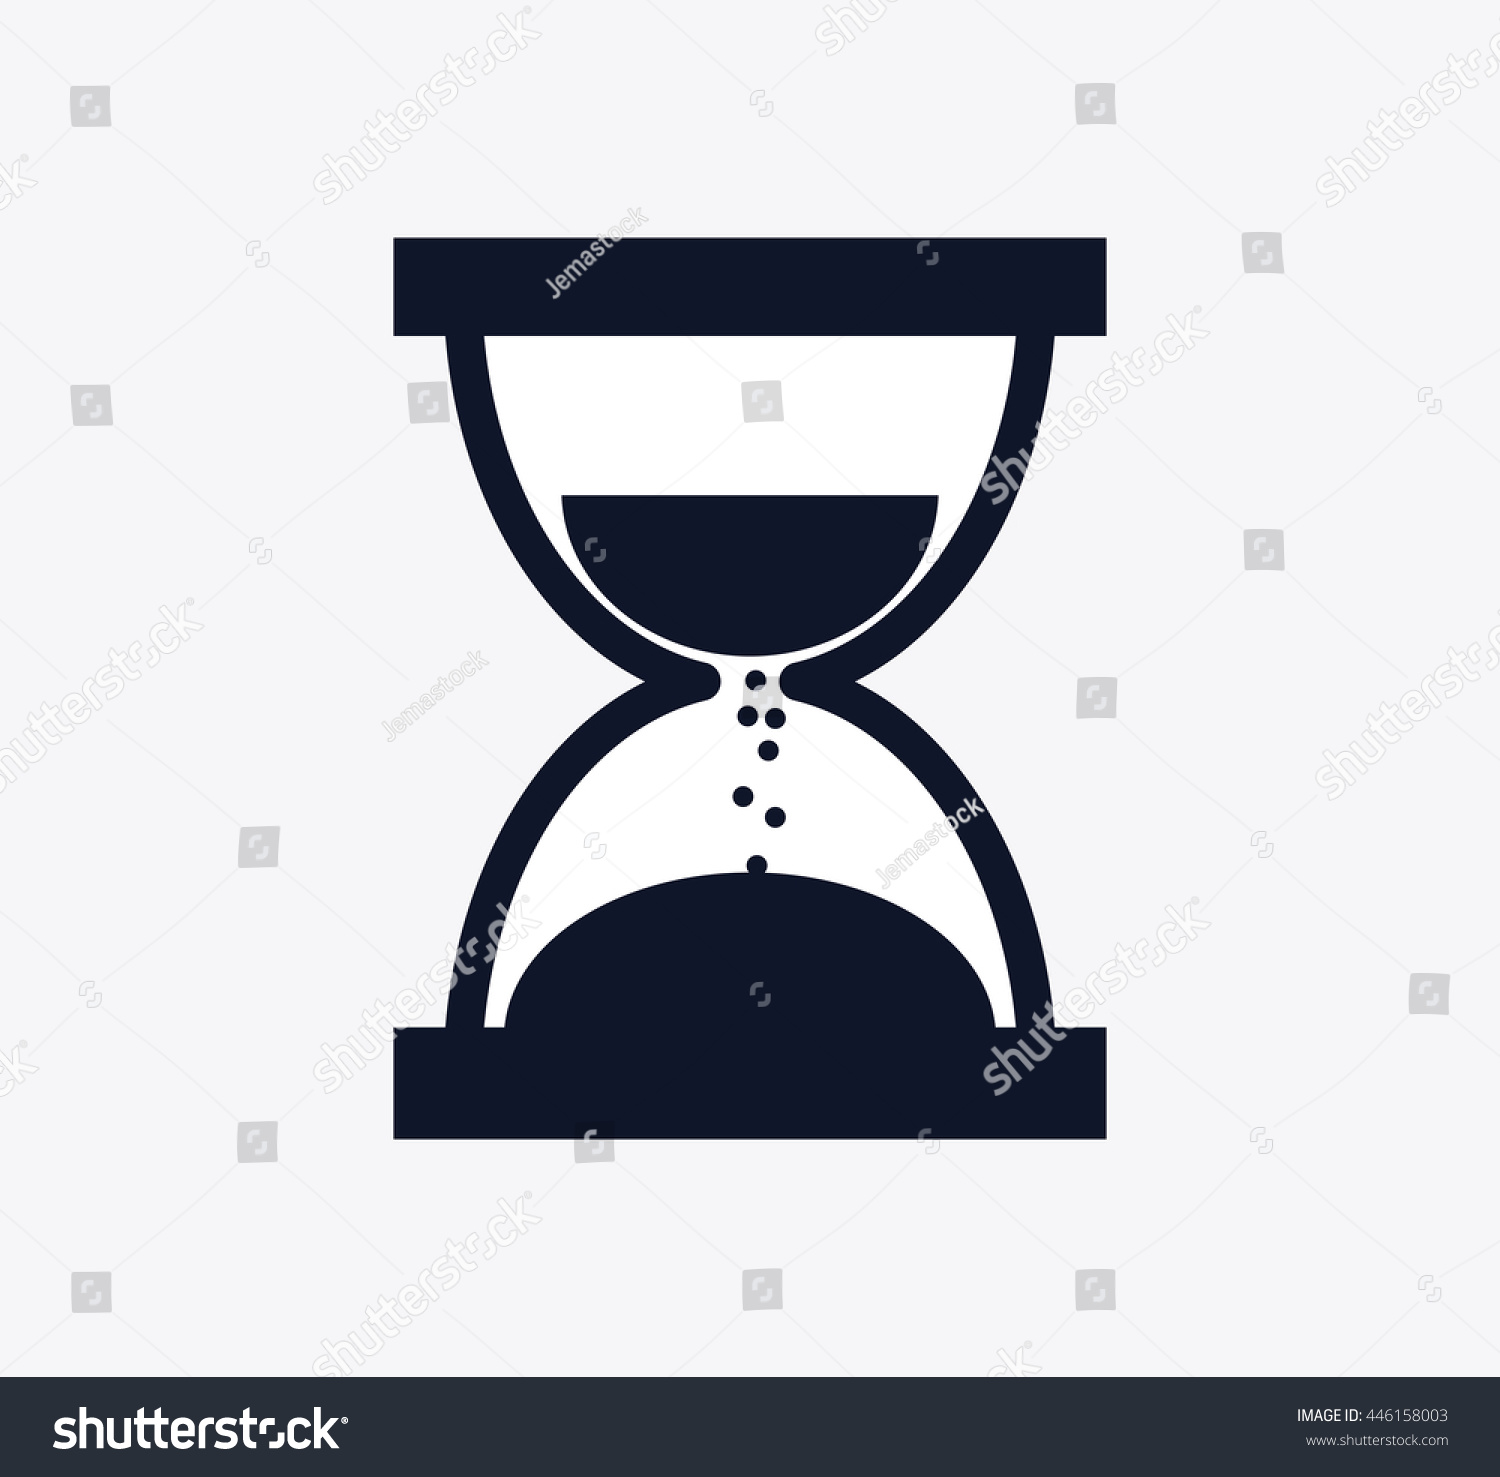 Silhouette Hourglass Icon Time Design Vector Stock Vector Royalty Free 446158003 Shutterstock 8365